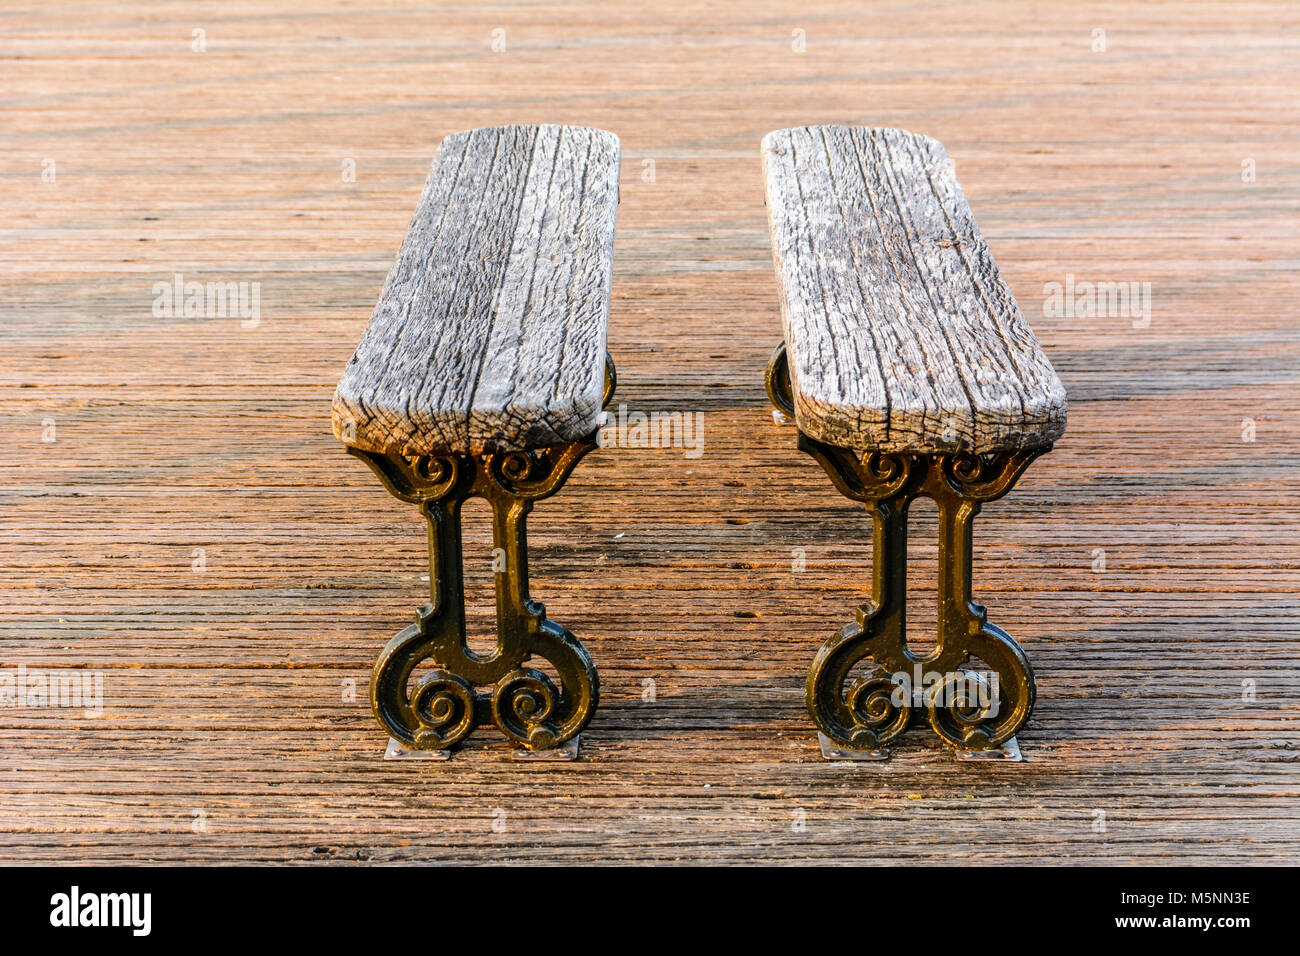 two old wooden benches Stock Photo